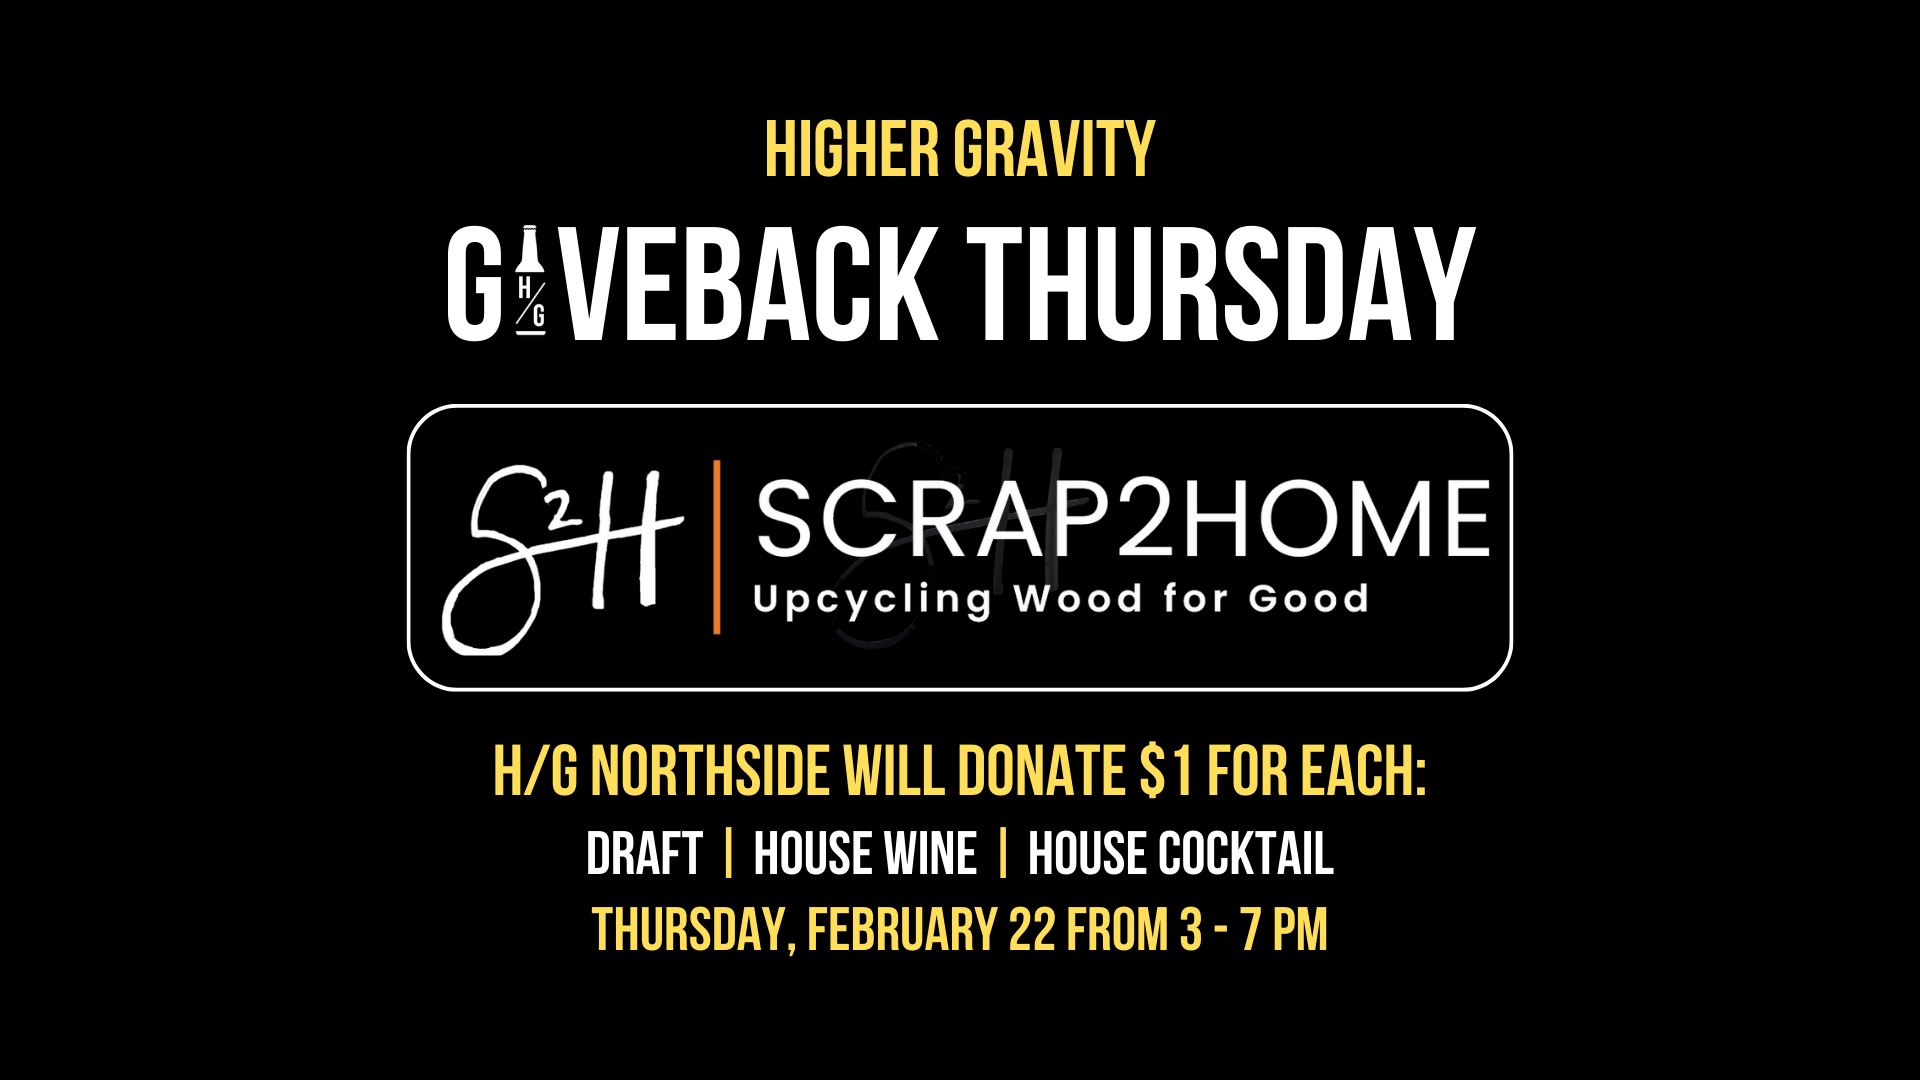 Giveback Thursday Featuring Scrap2Home. Higher Gravity will be donating $1 for every draft, house wine or cocktail from 3-7pm on 2/22.